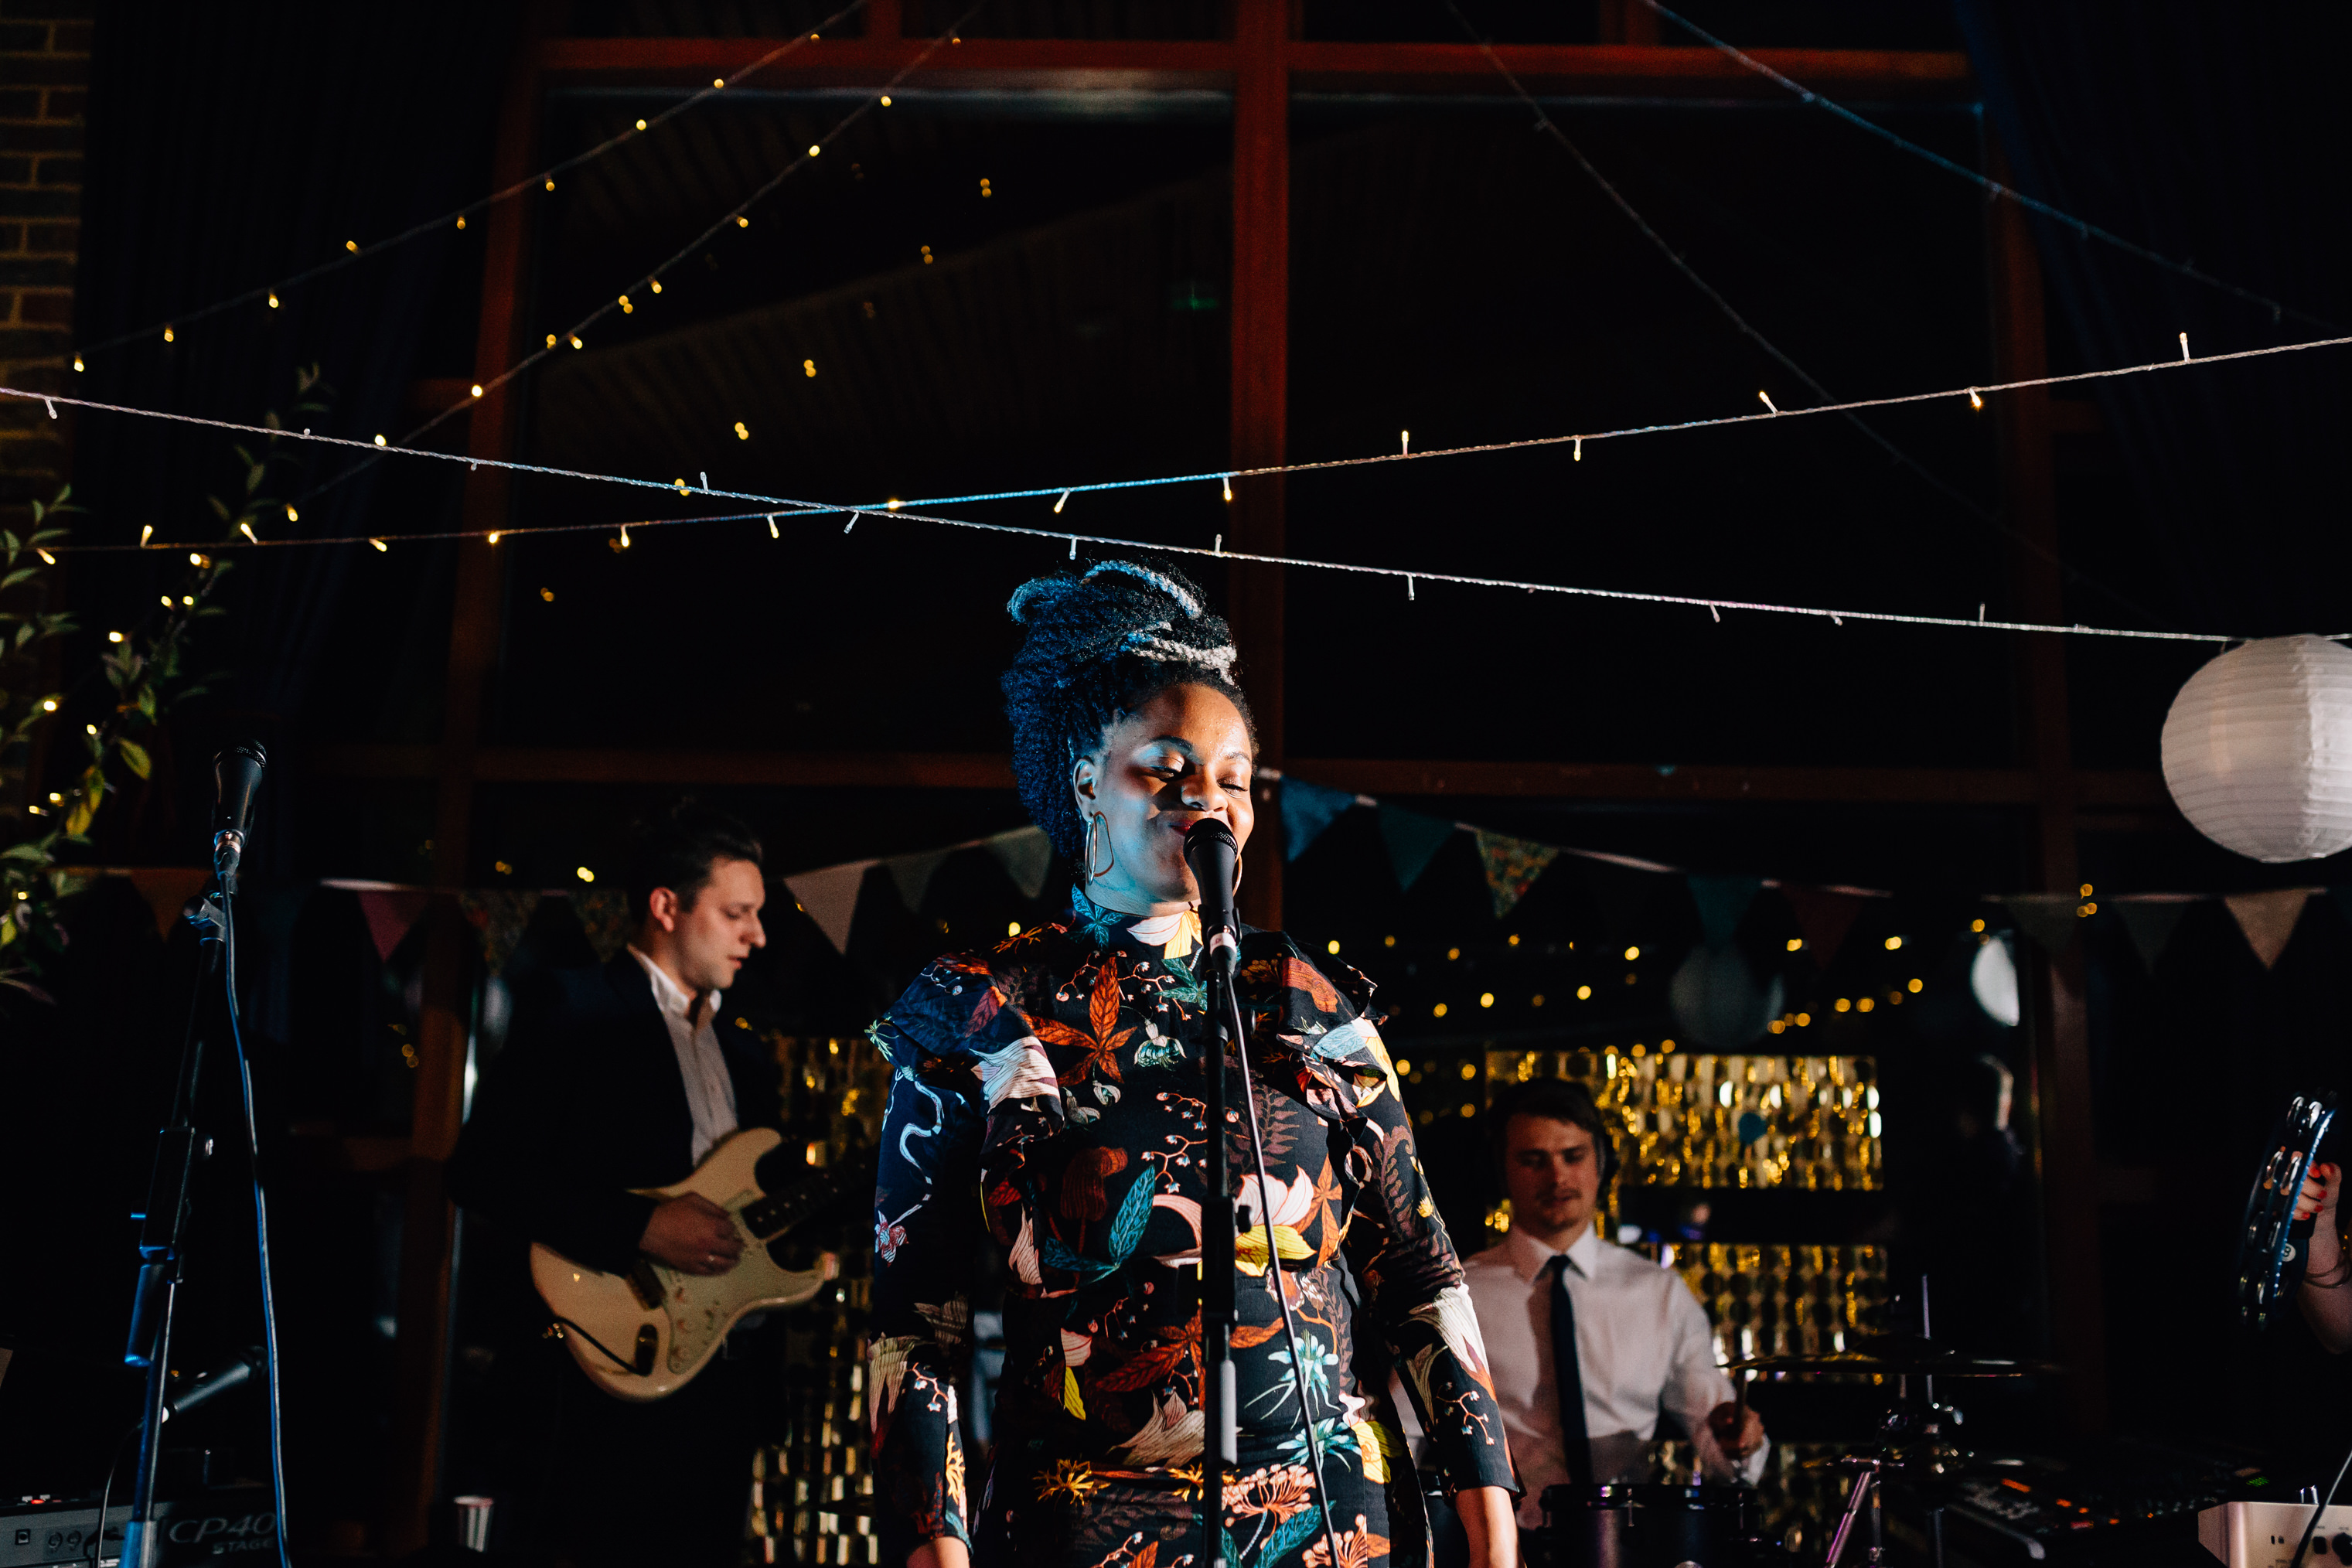 quirky fun autumn wedding in london wedding photographer documentary style first dance